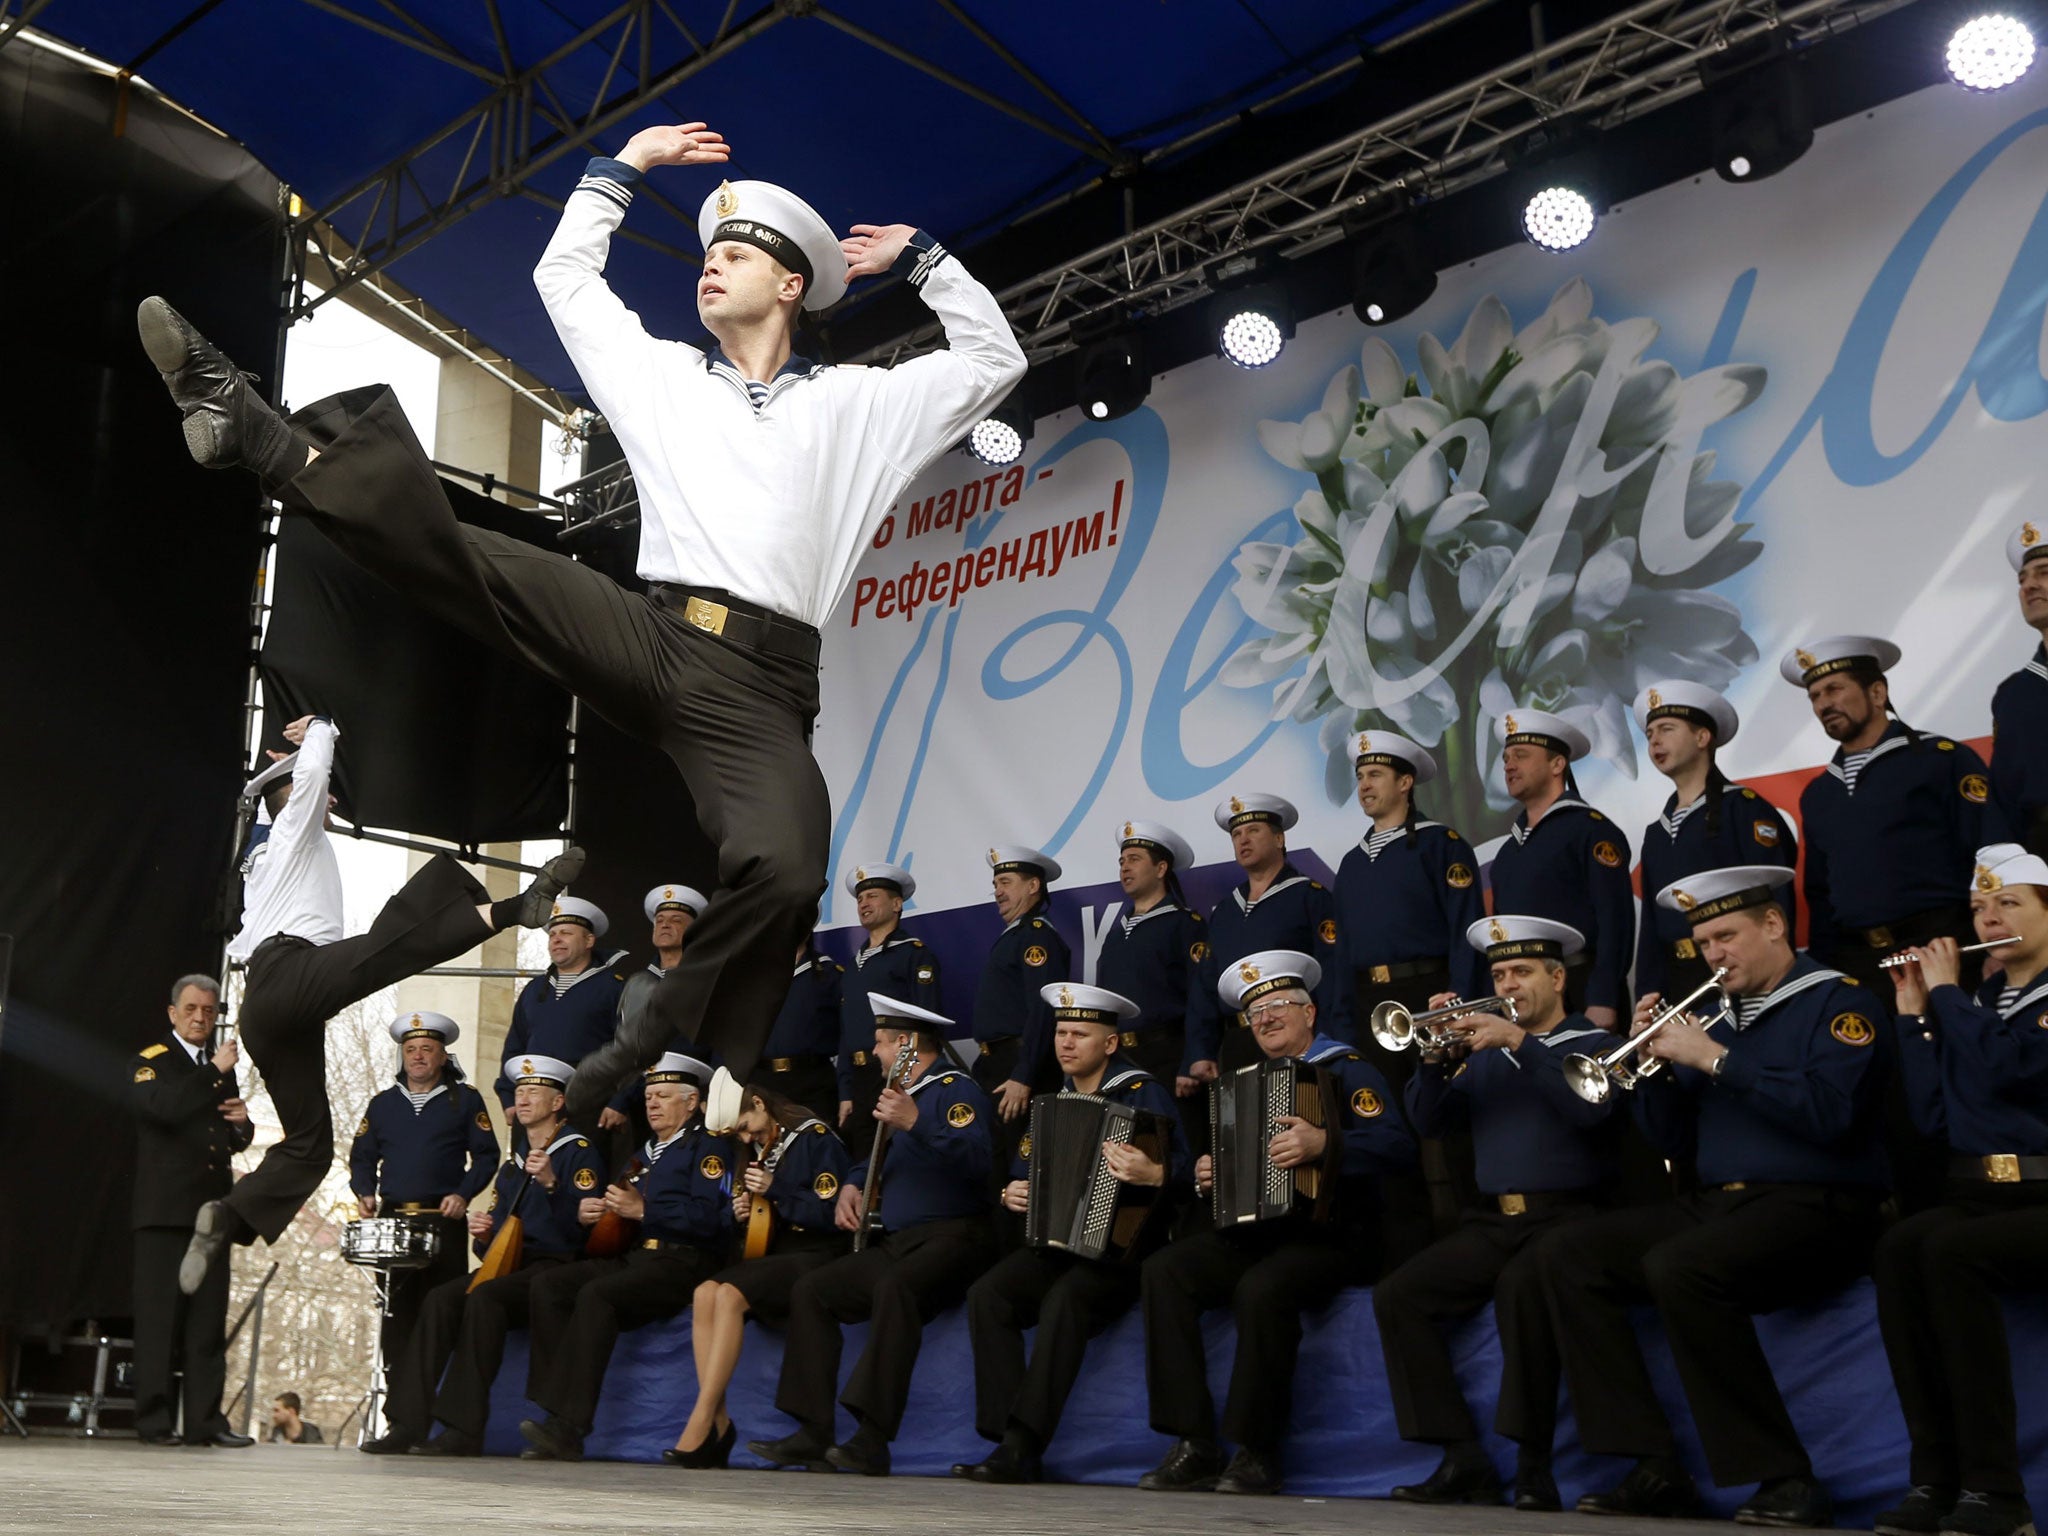 The Russian Song and Dance Ensemble of the Black Sea Fleet perform in Simferopol